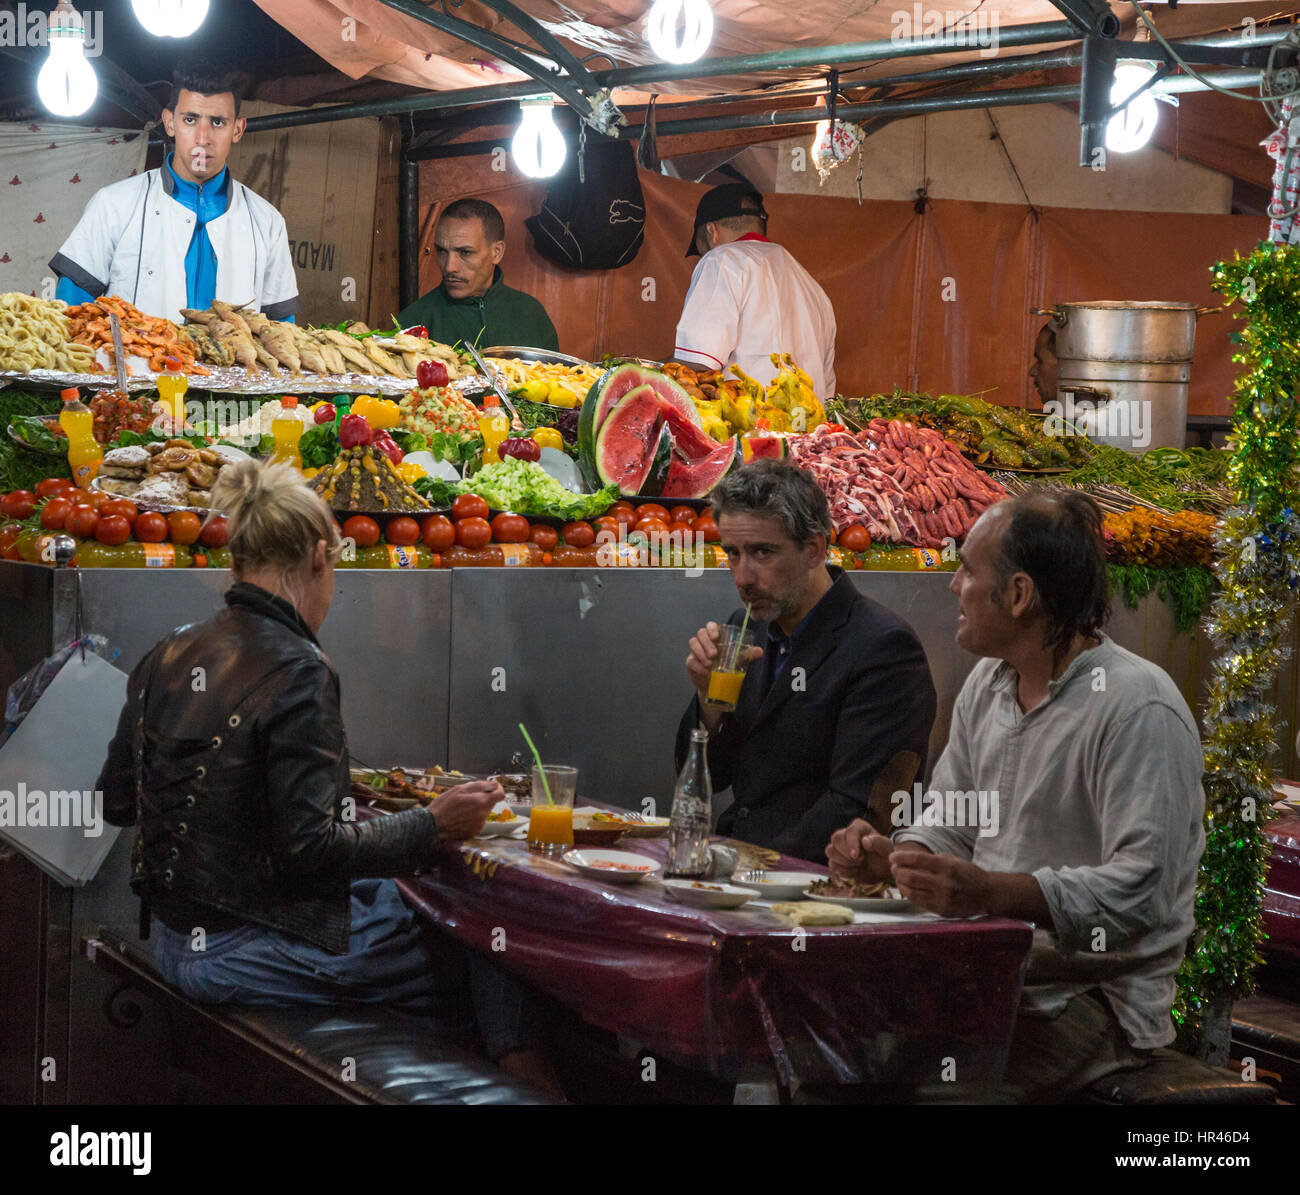 Marrakesh, Morocco. Tourists Eating at Food Stall,  Place Jemaa El-Fna. Stock Photo